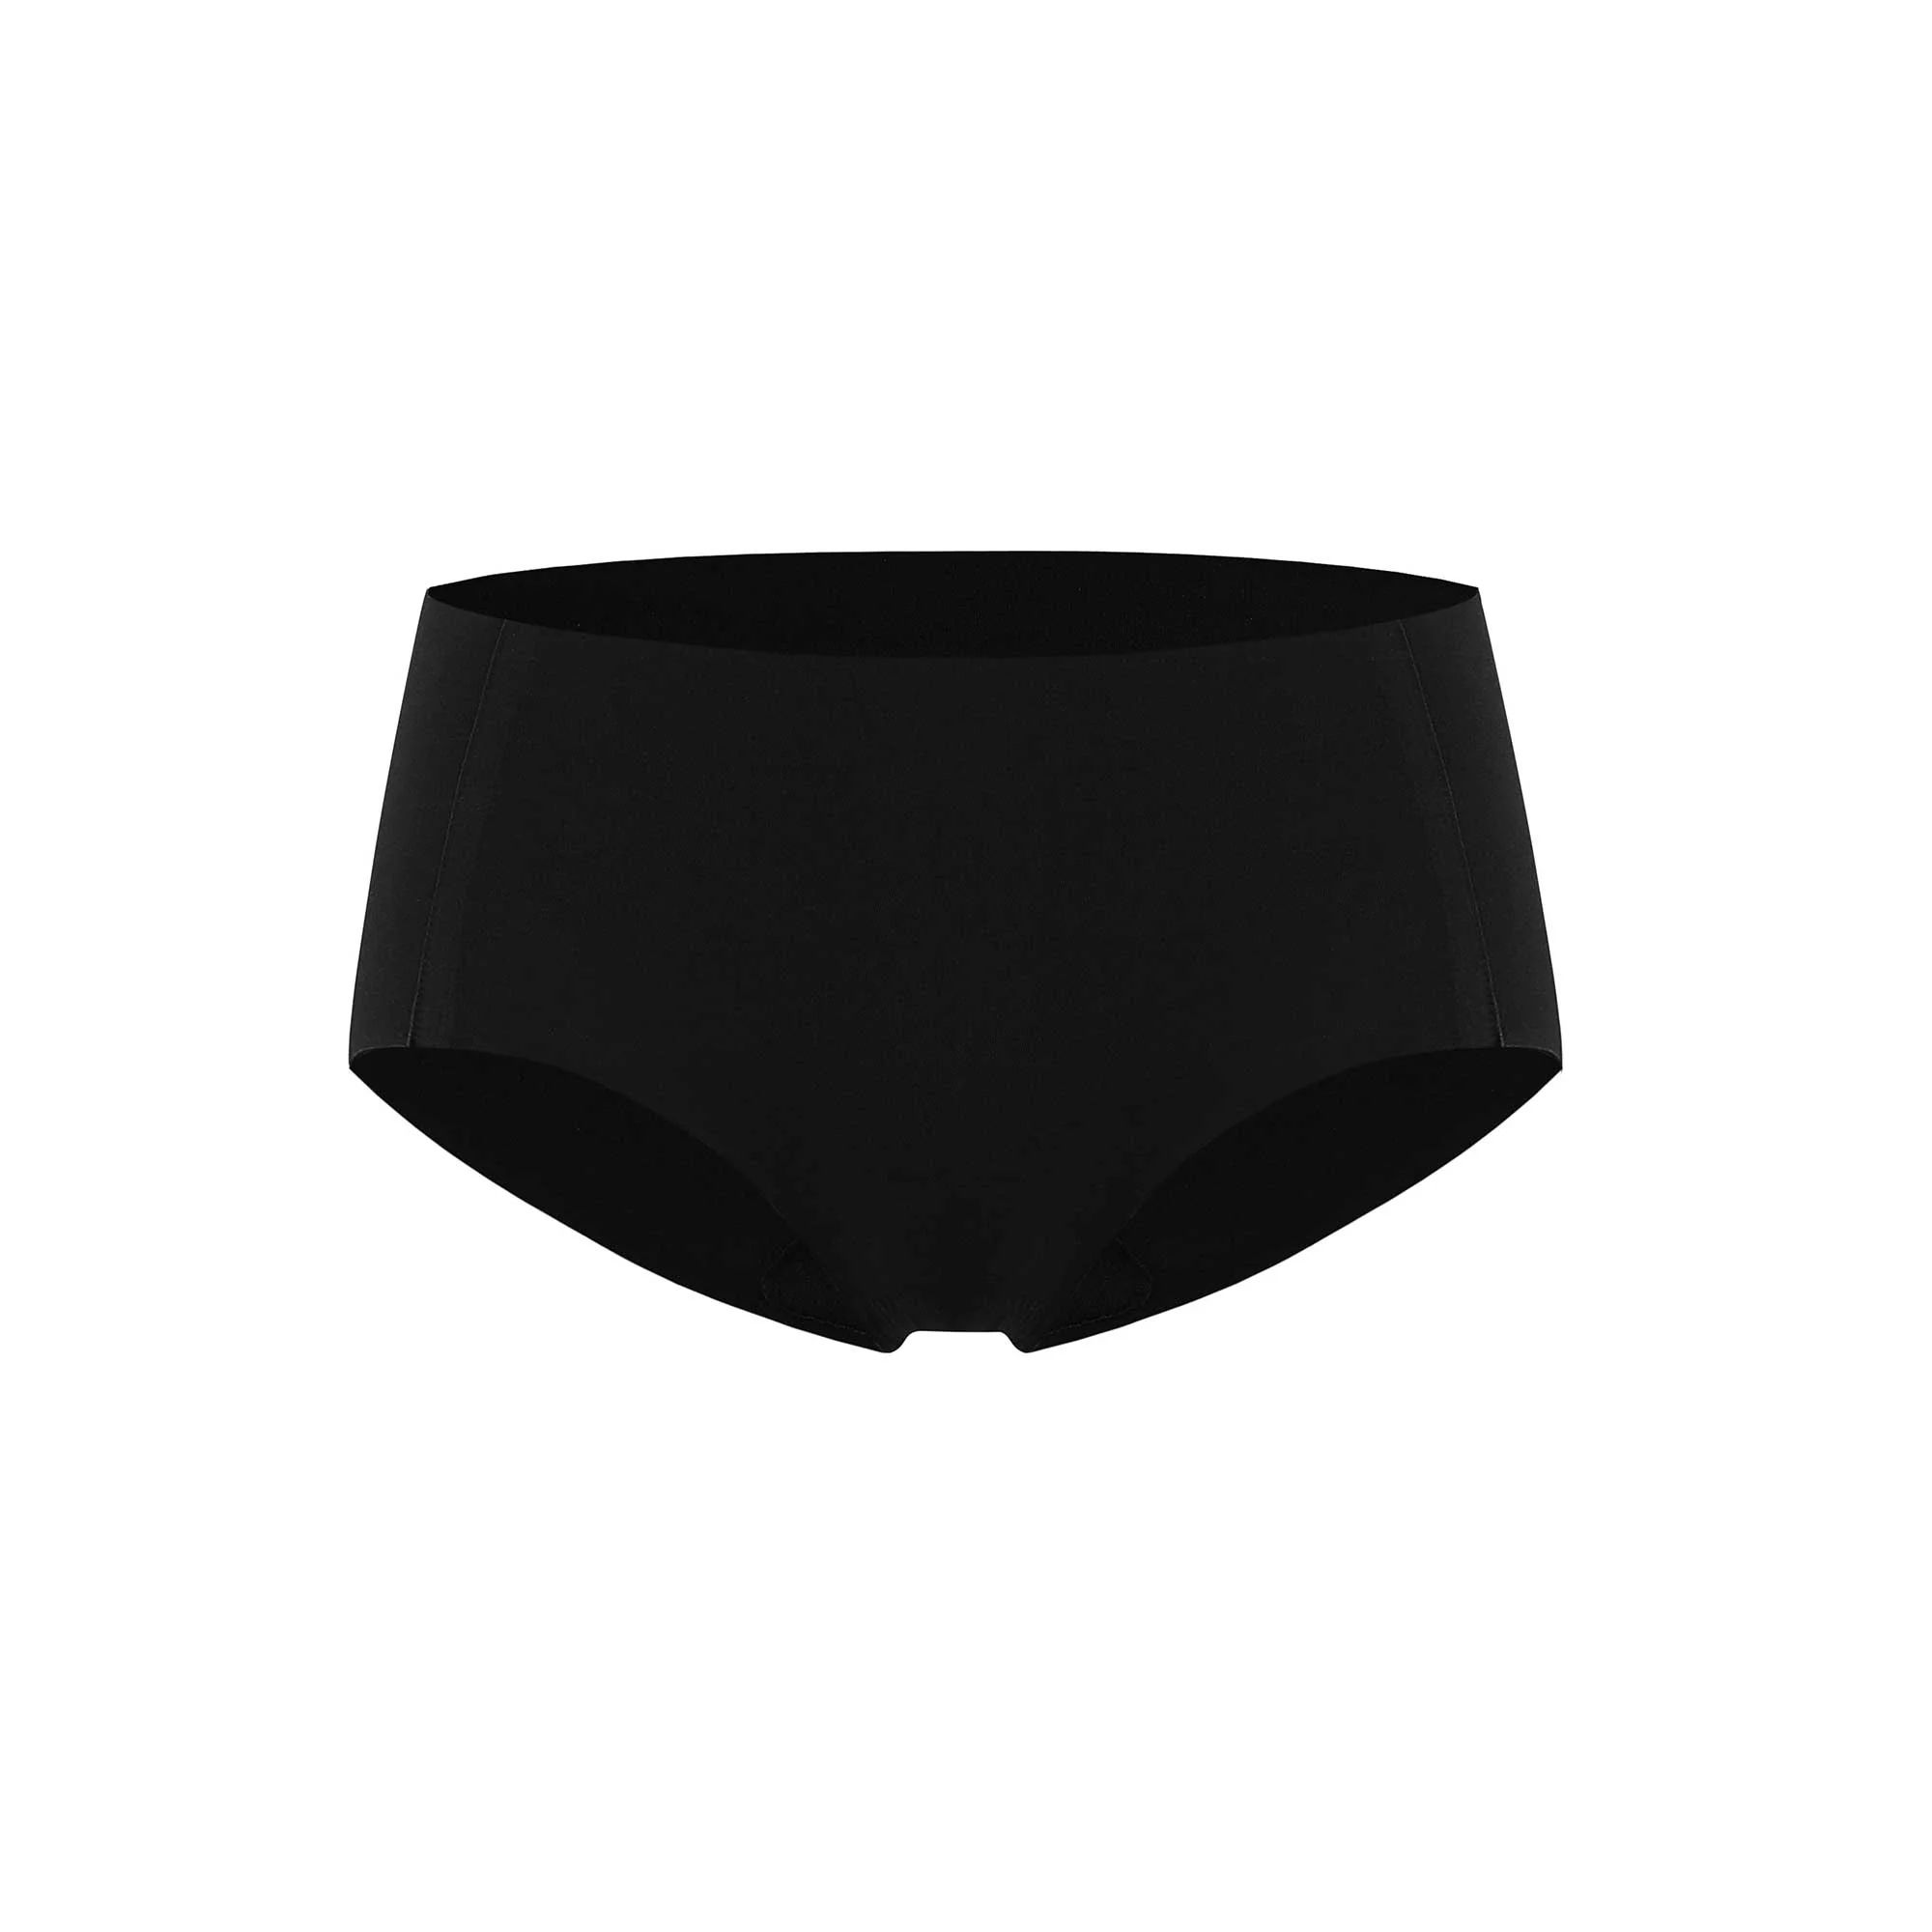 2021 Barely Zero® Your-Size-Is-The-Size Mid Waist Brief | NEIWAI